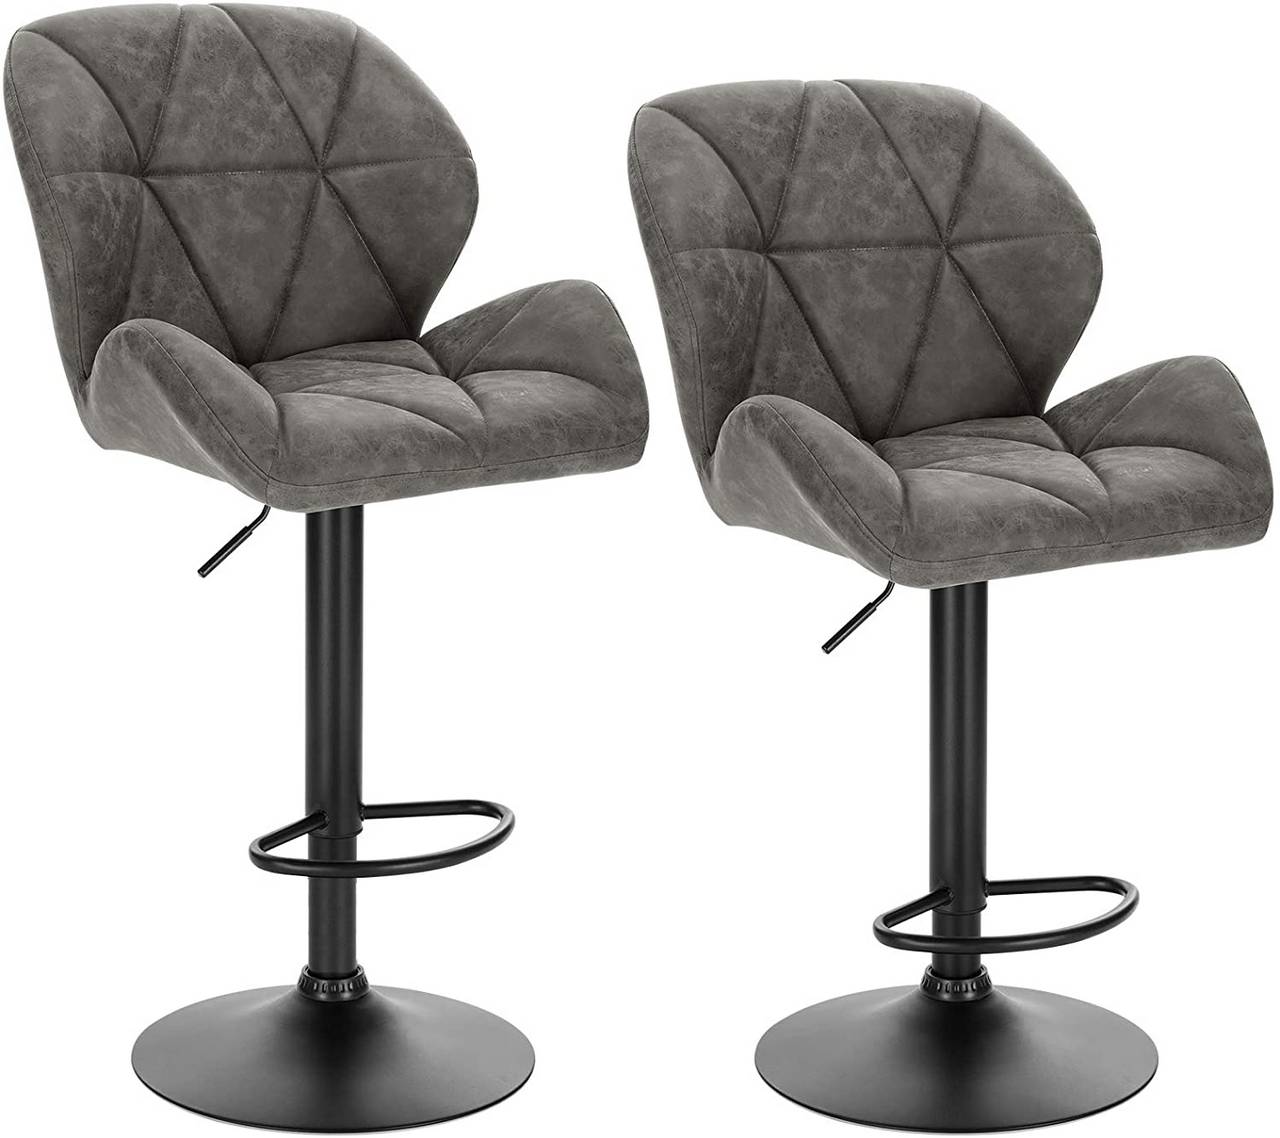 Set of 2 bar stools, counter stools, bistro stools with backrest made of  imitation leather